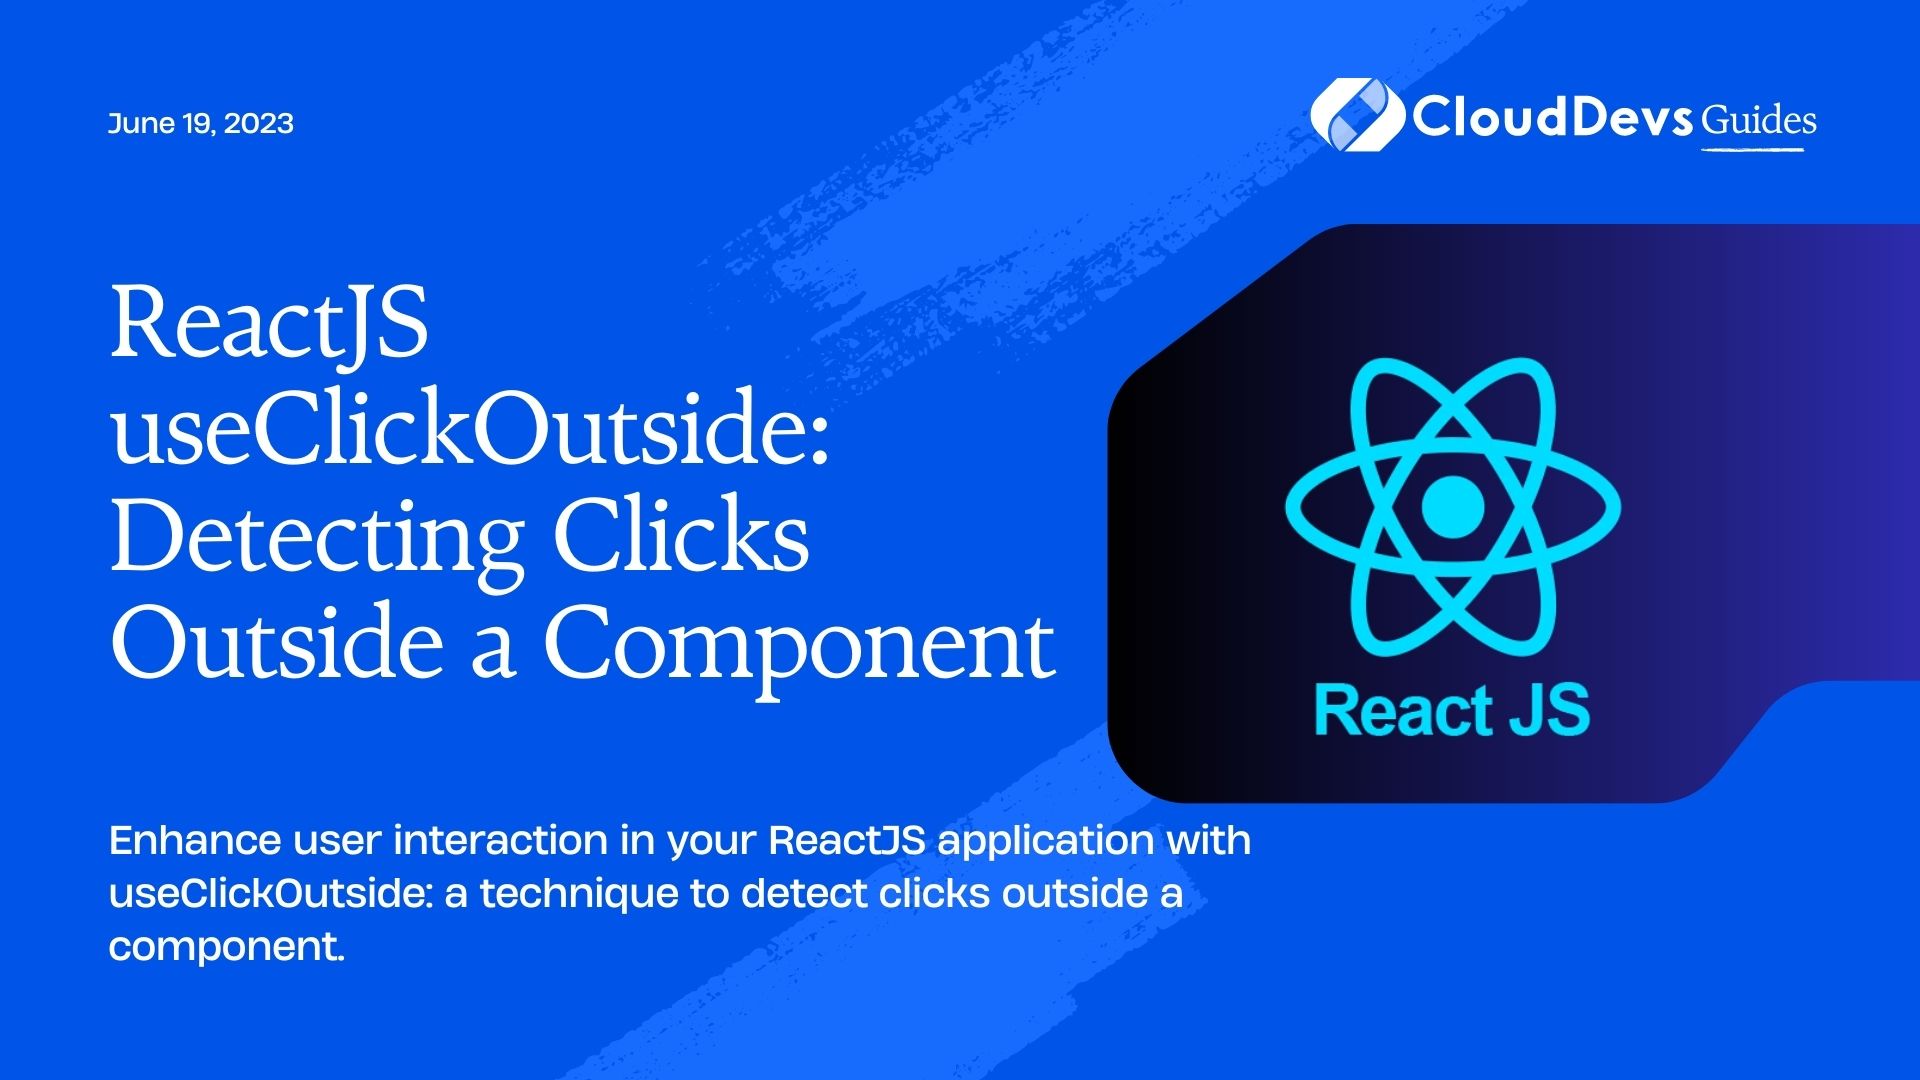 Enhance user interaction in your ReactJS application with